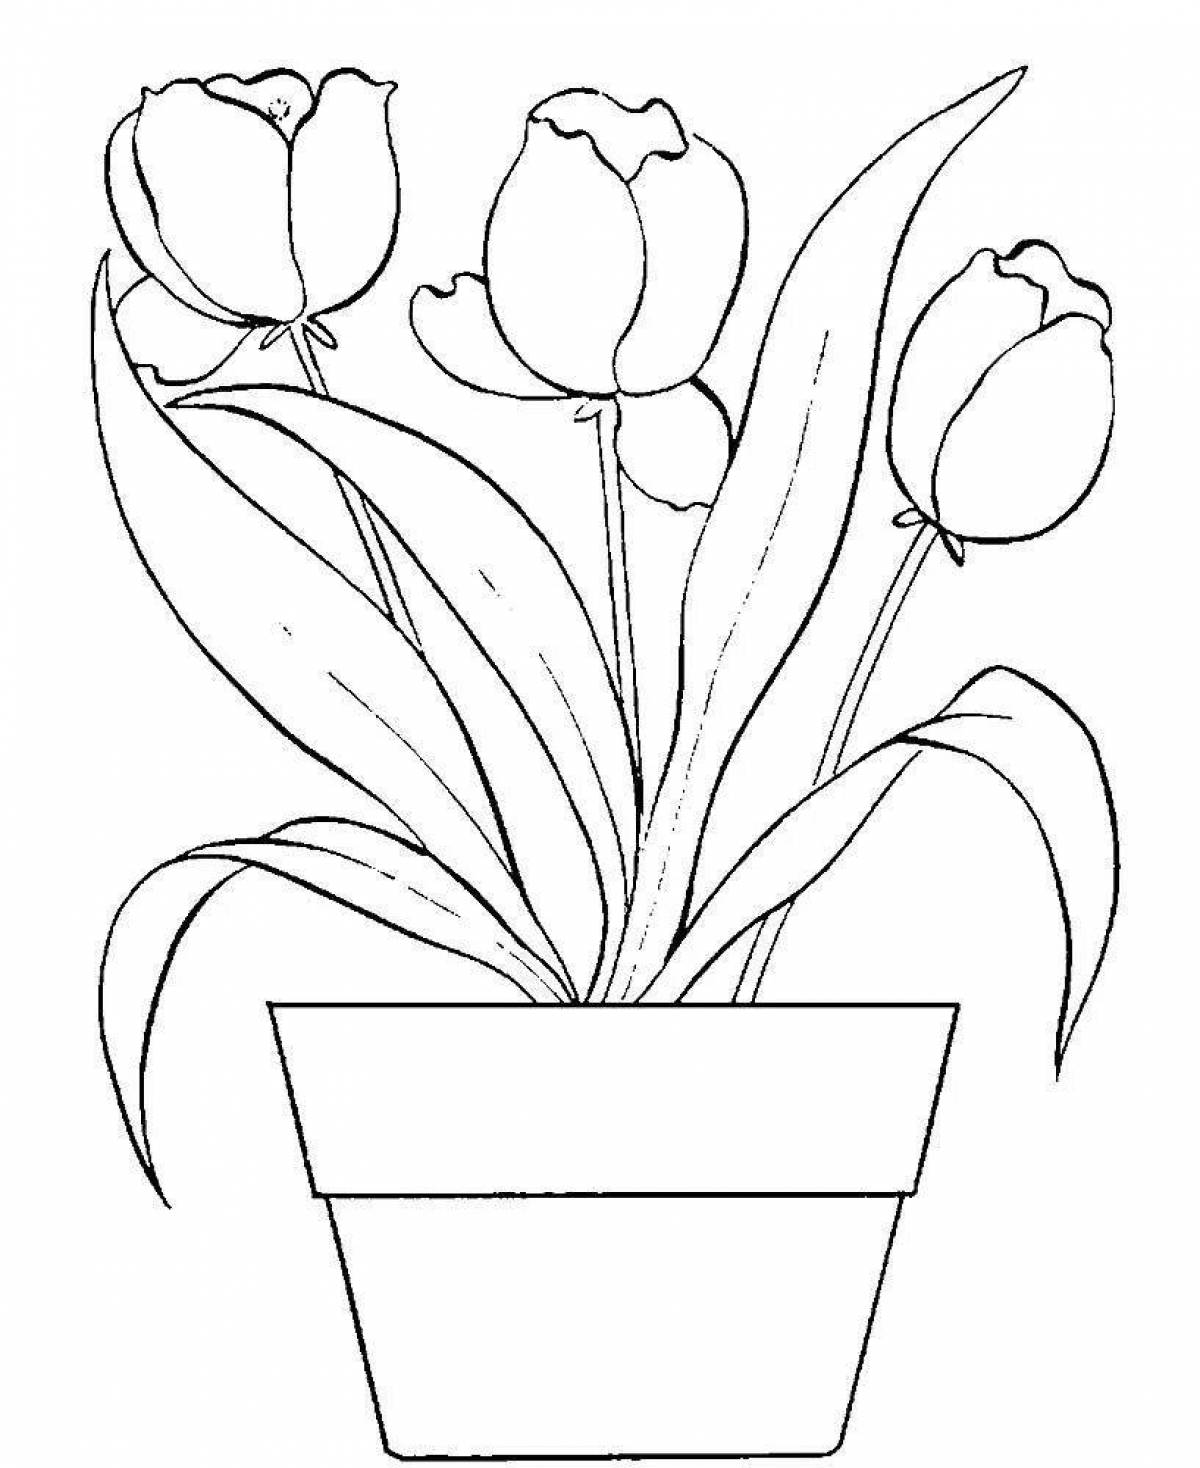 Coloring book exotic vase with flowers for children 5-6 years old